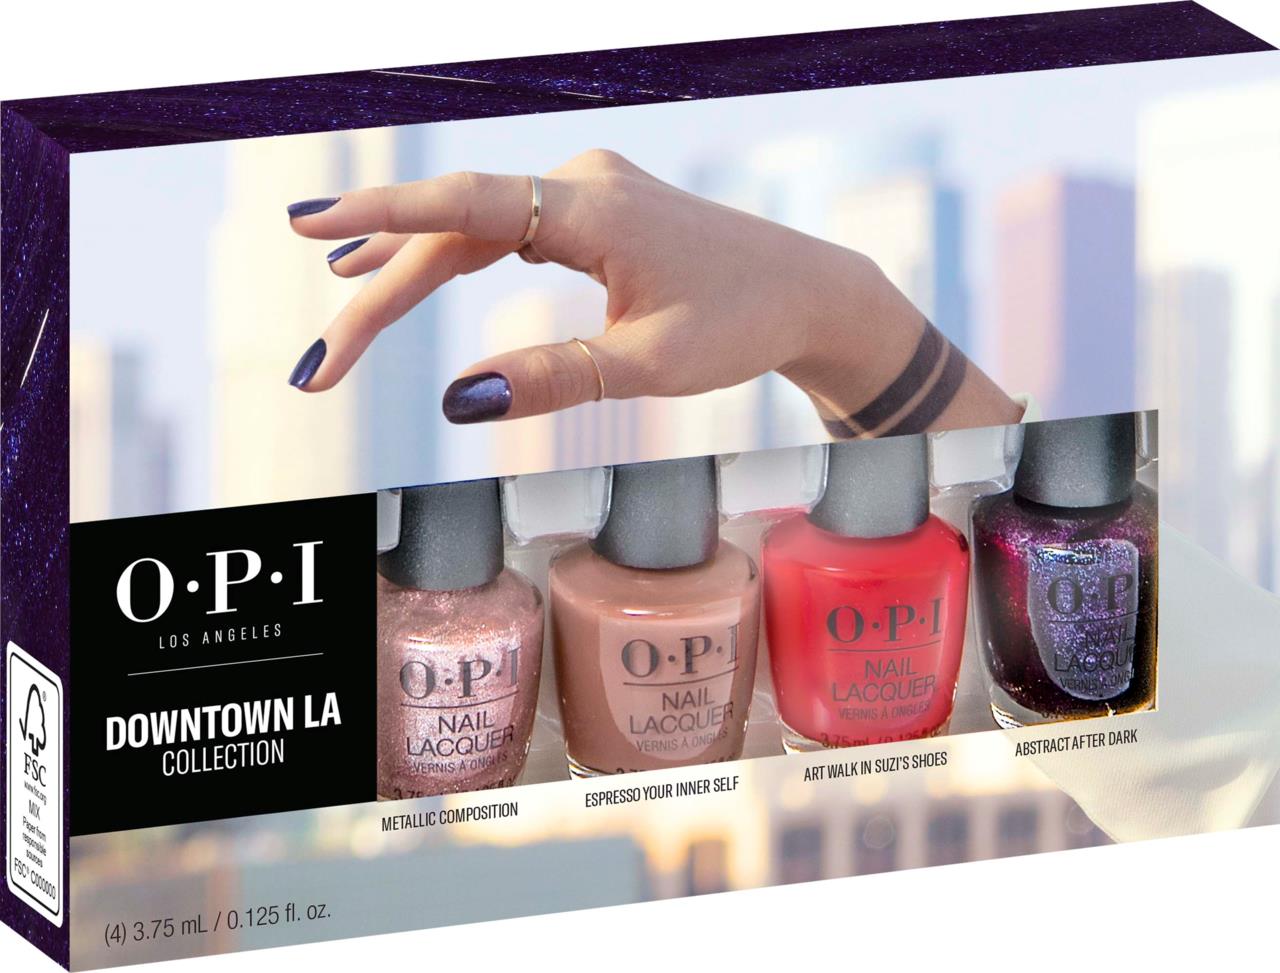 August OPI Nail Lacquer - wide 7